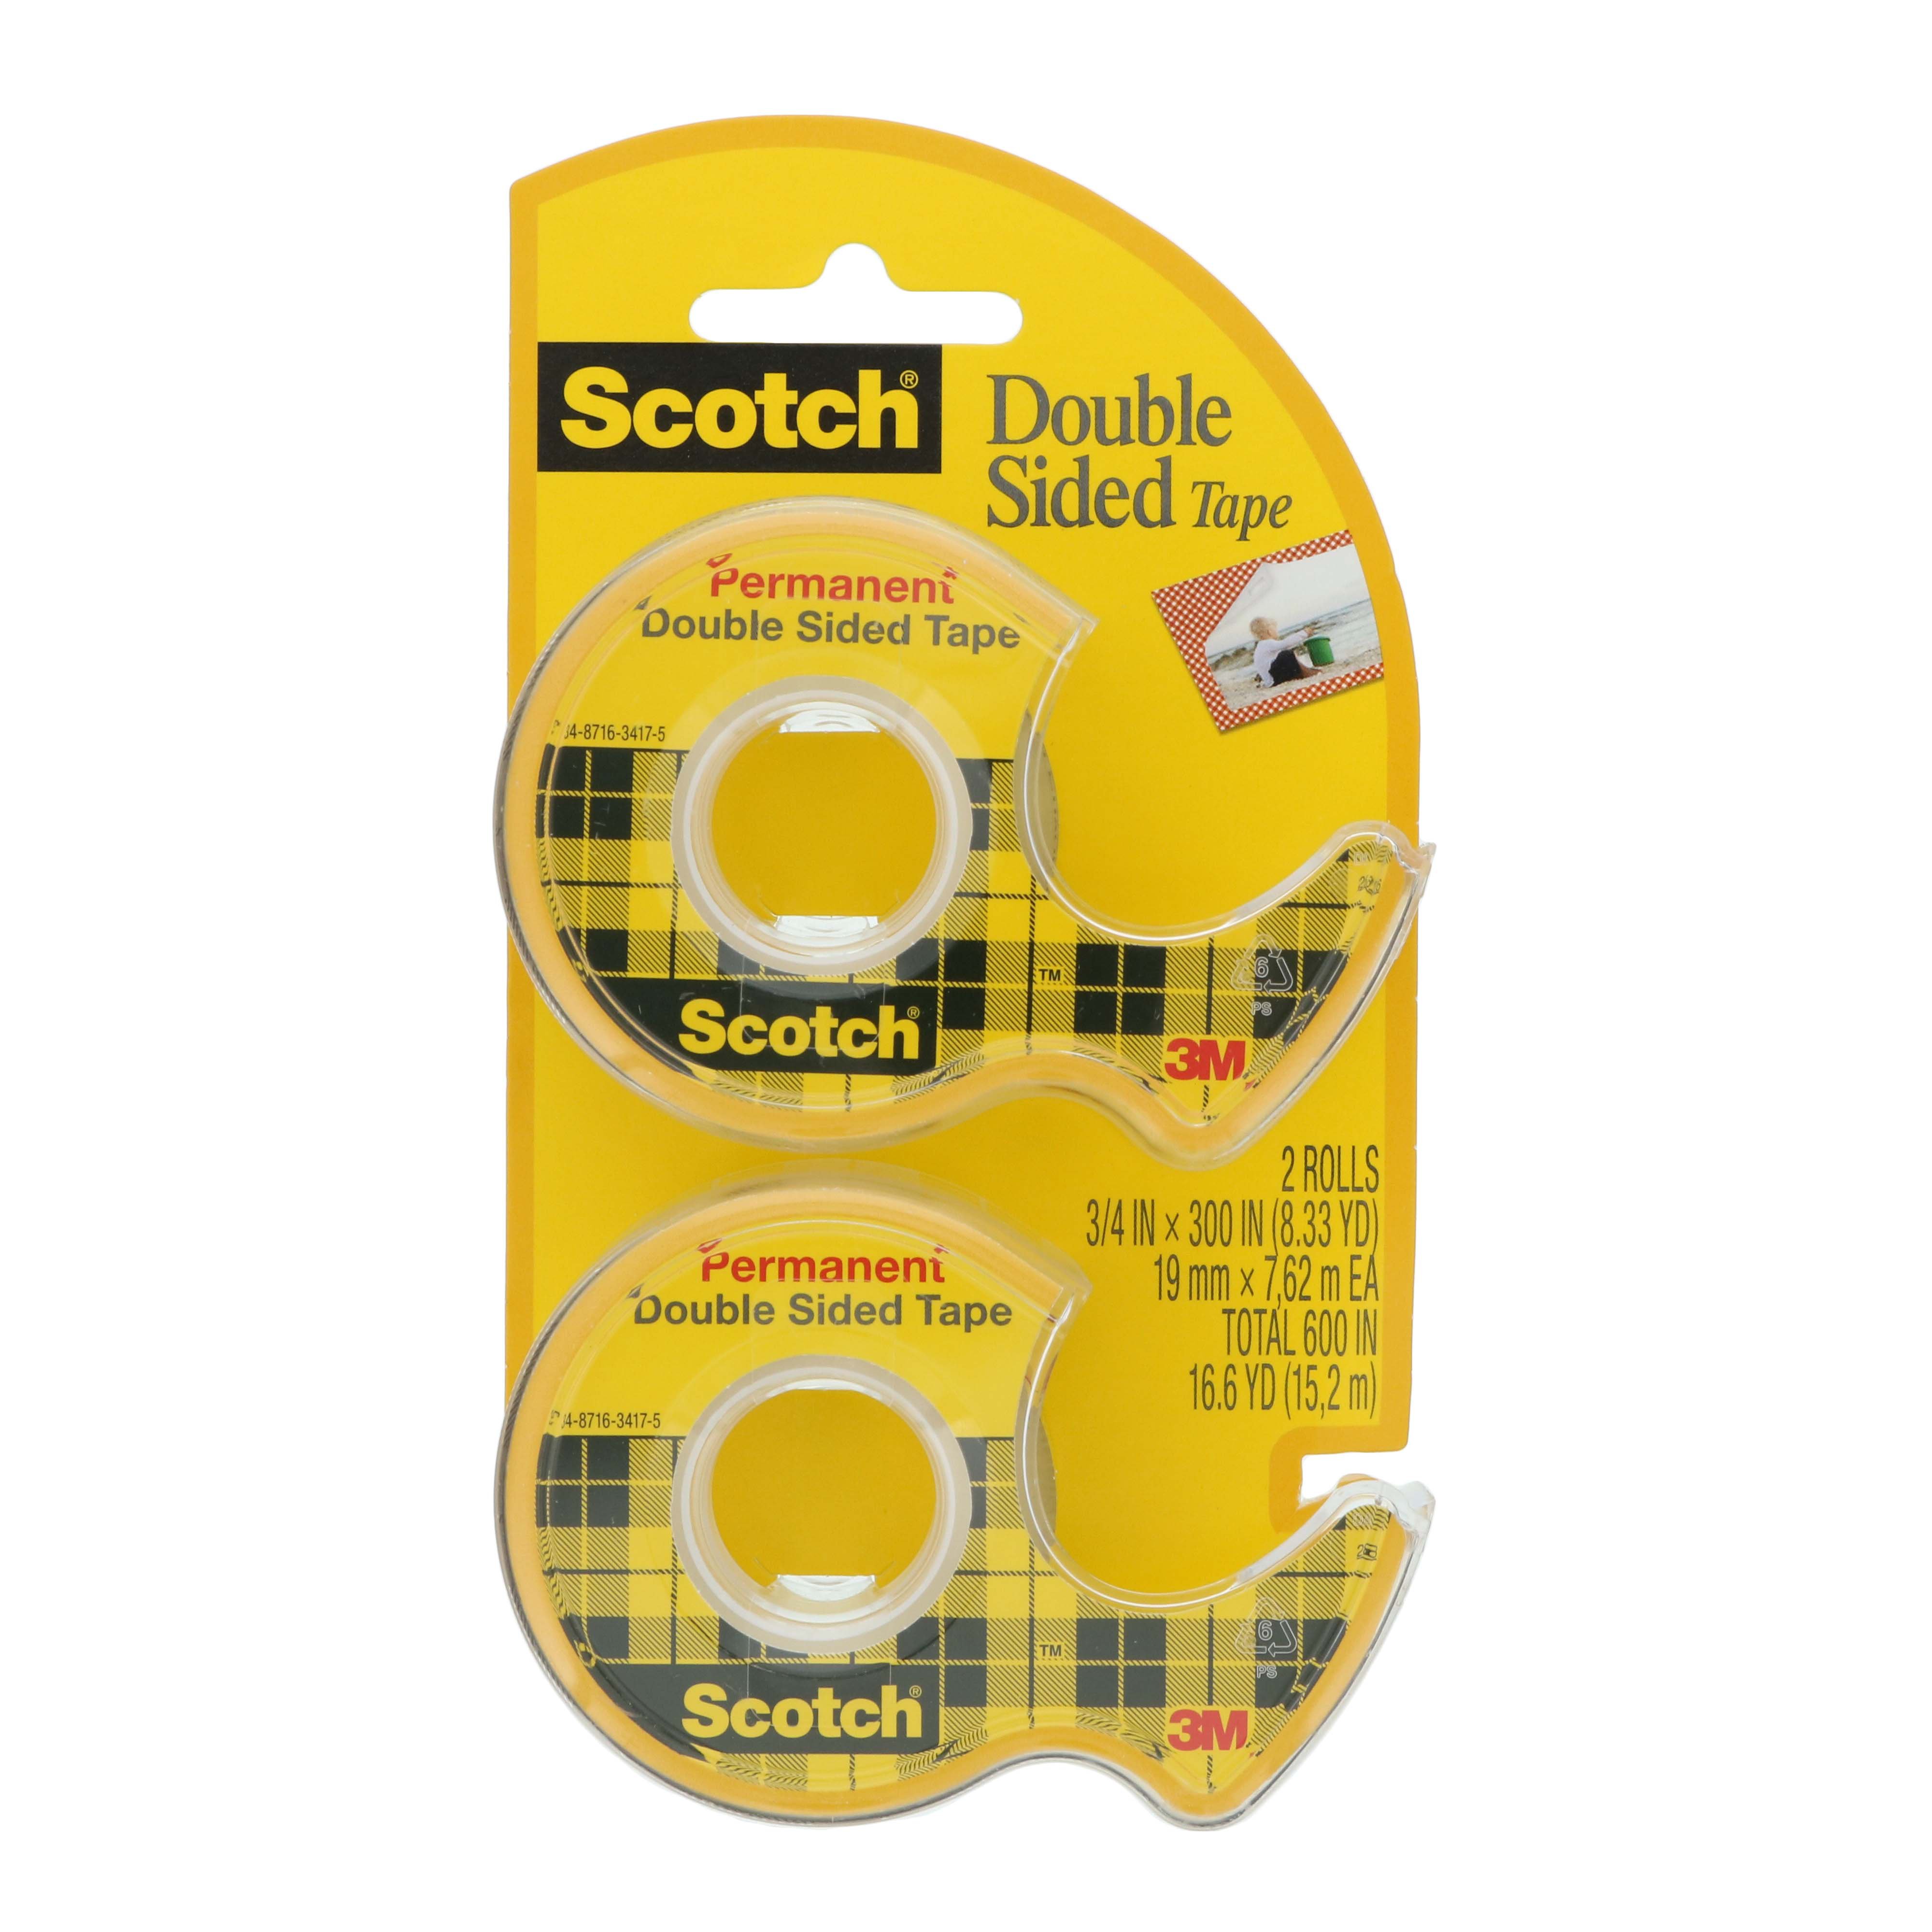 Scotch Double Sided Tape - Shop Tape at H-E-B